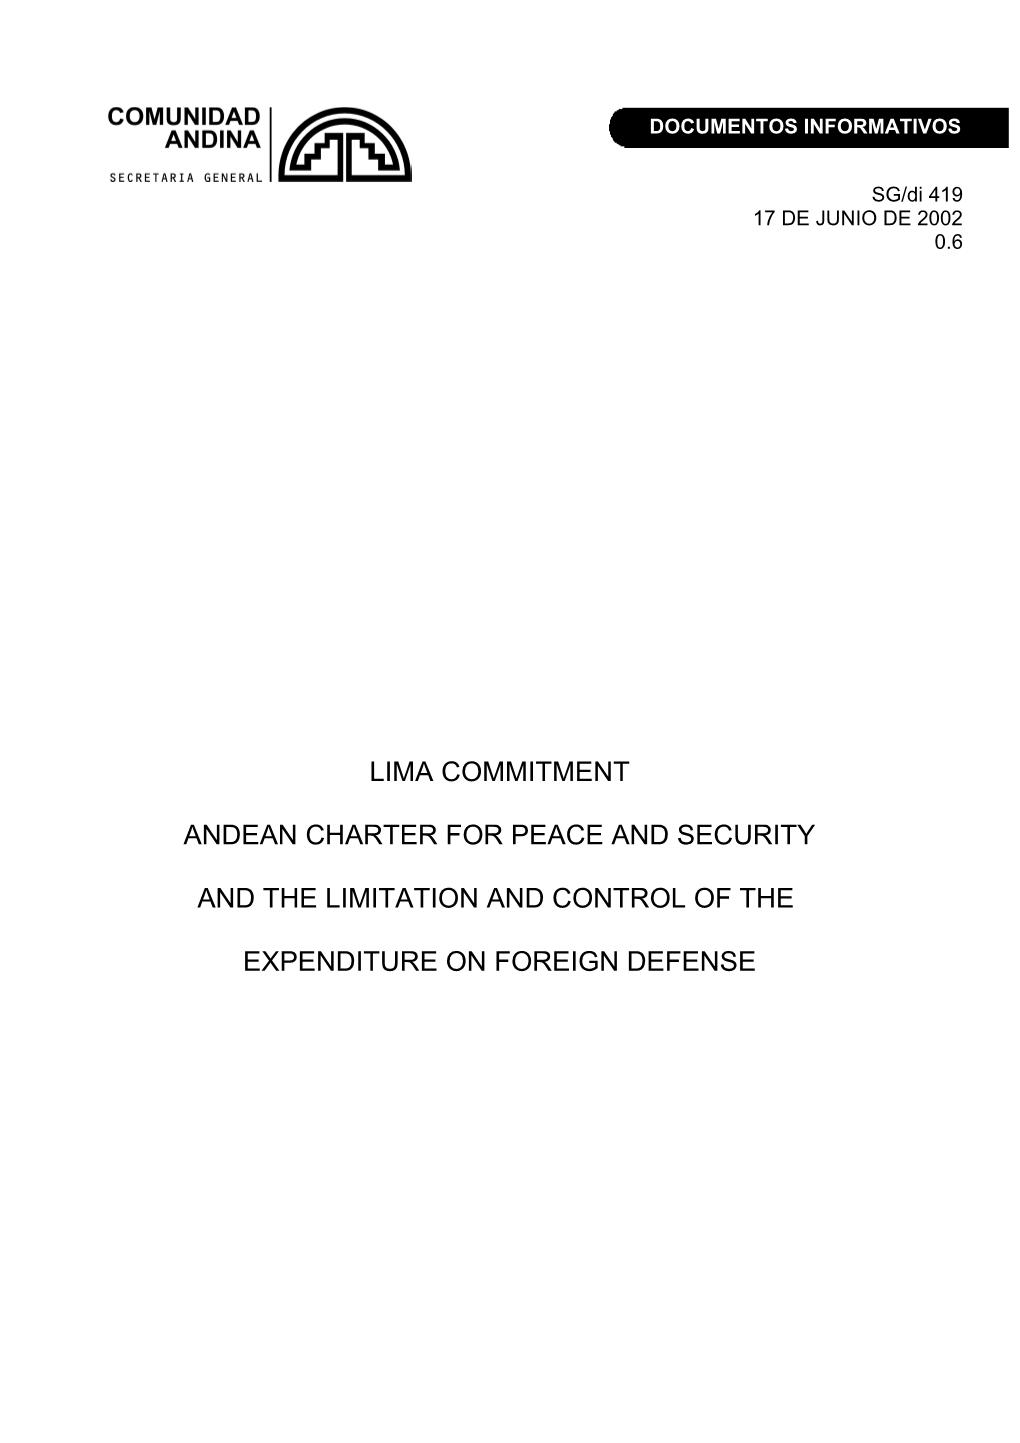 Lima Commitment - Andean Charter for Peace and Security and the Limitation and Control